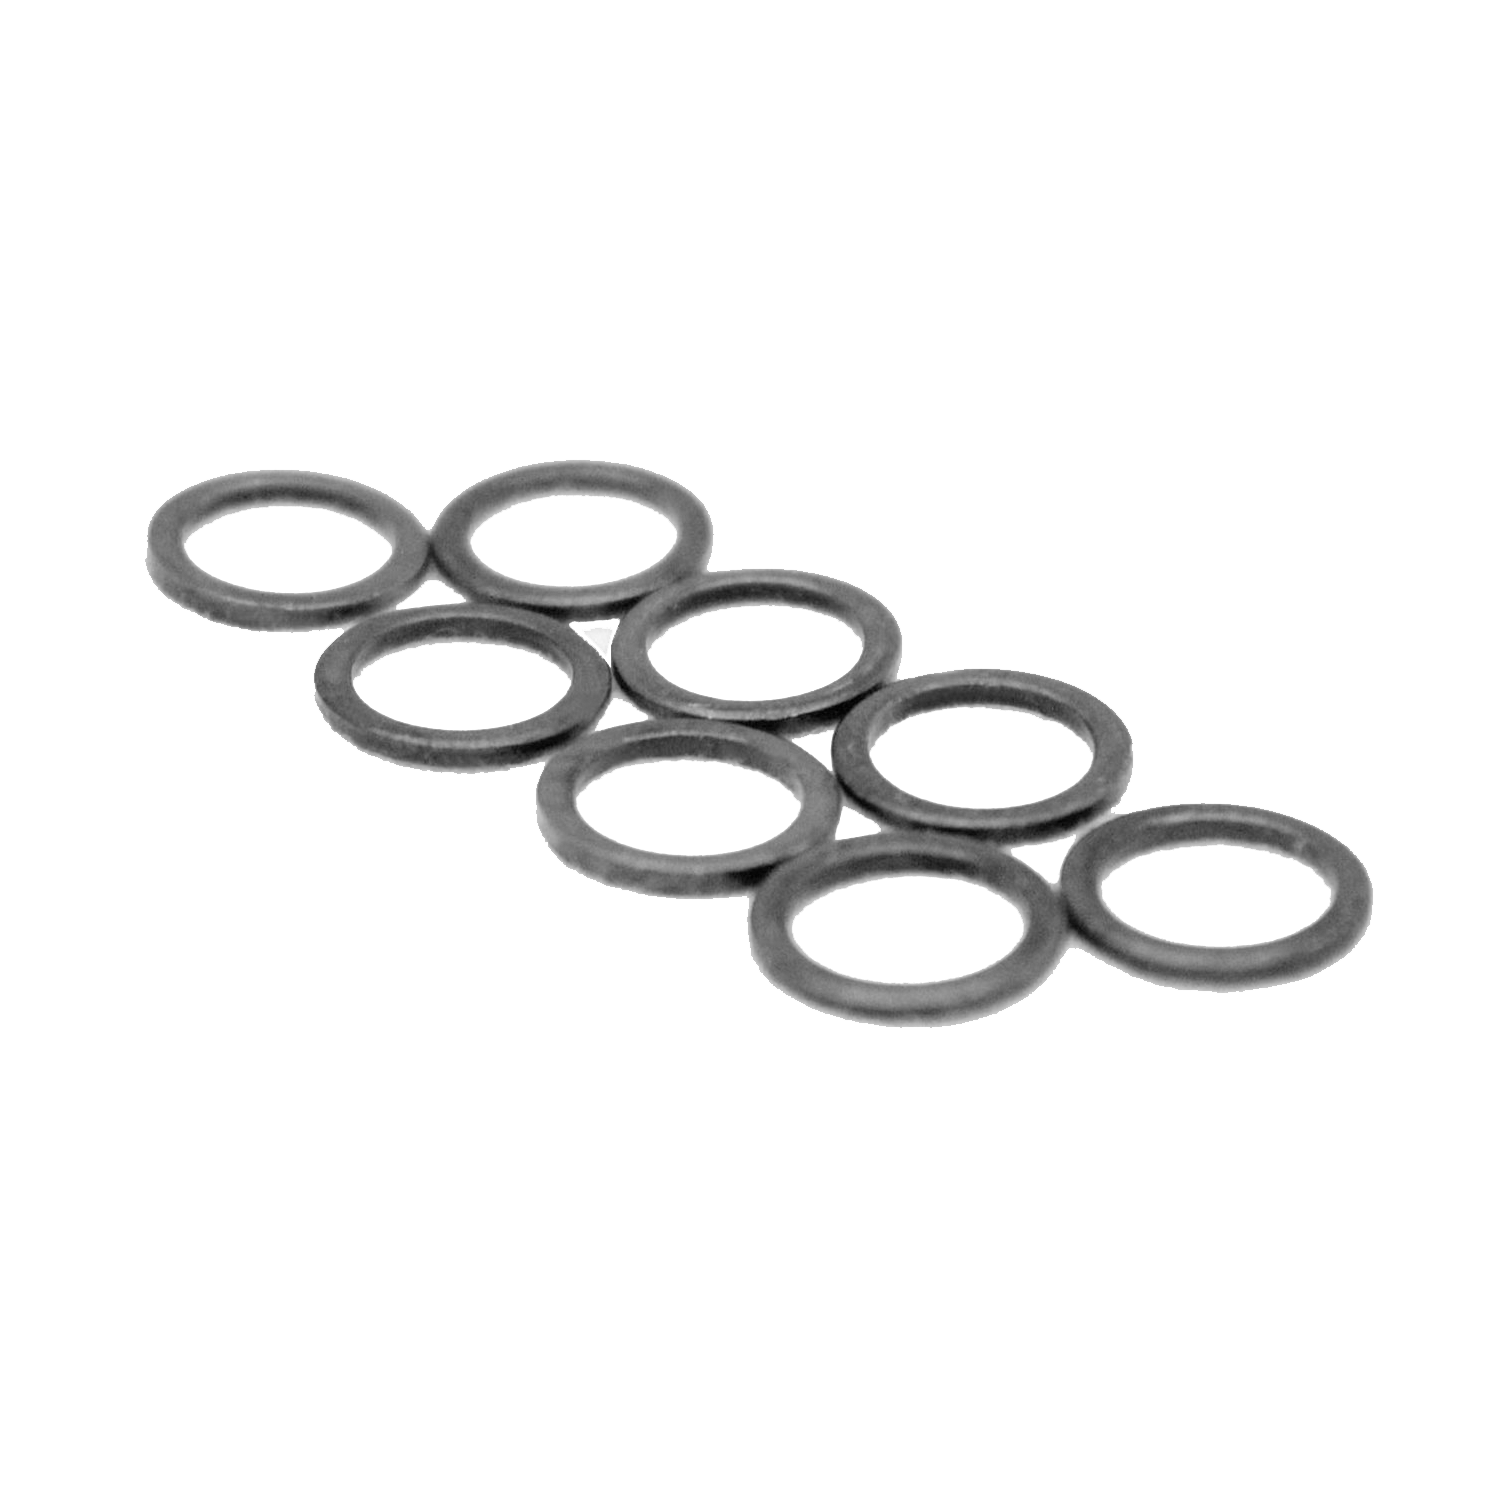 Dime Bag Skateboard Hardware Replacement Axle Washers 8 Pack